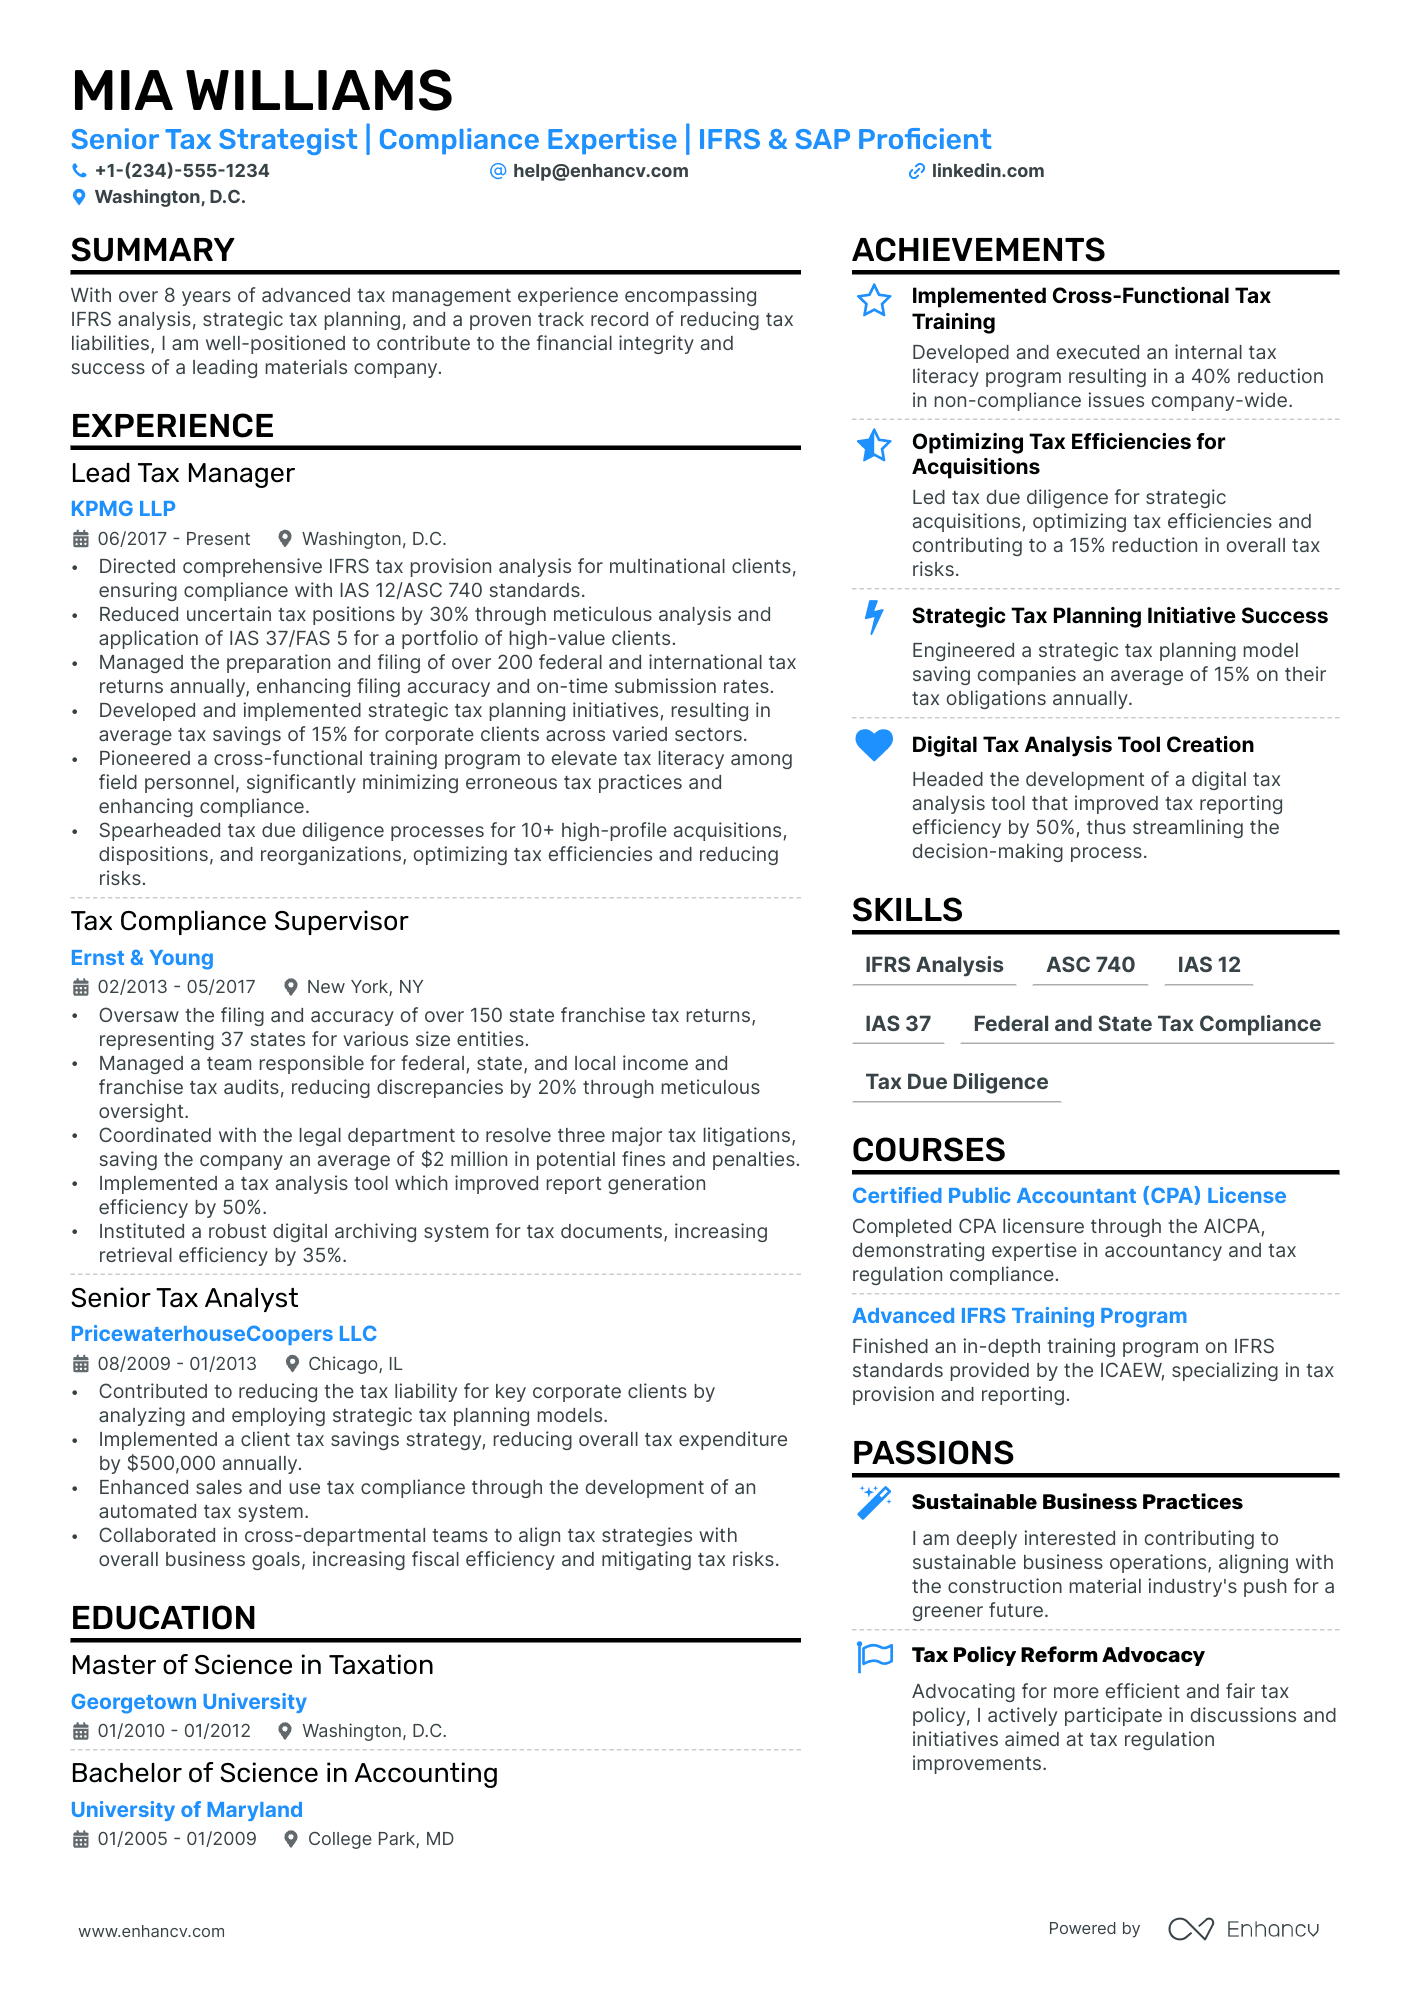 Tax Director resume example